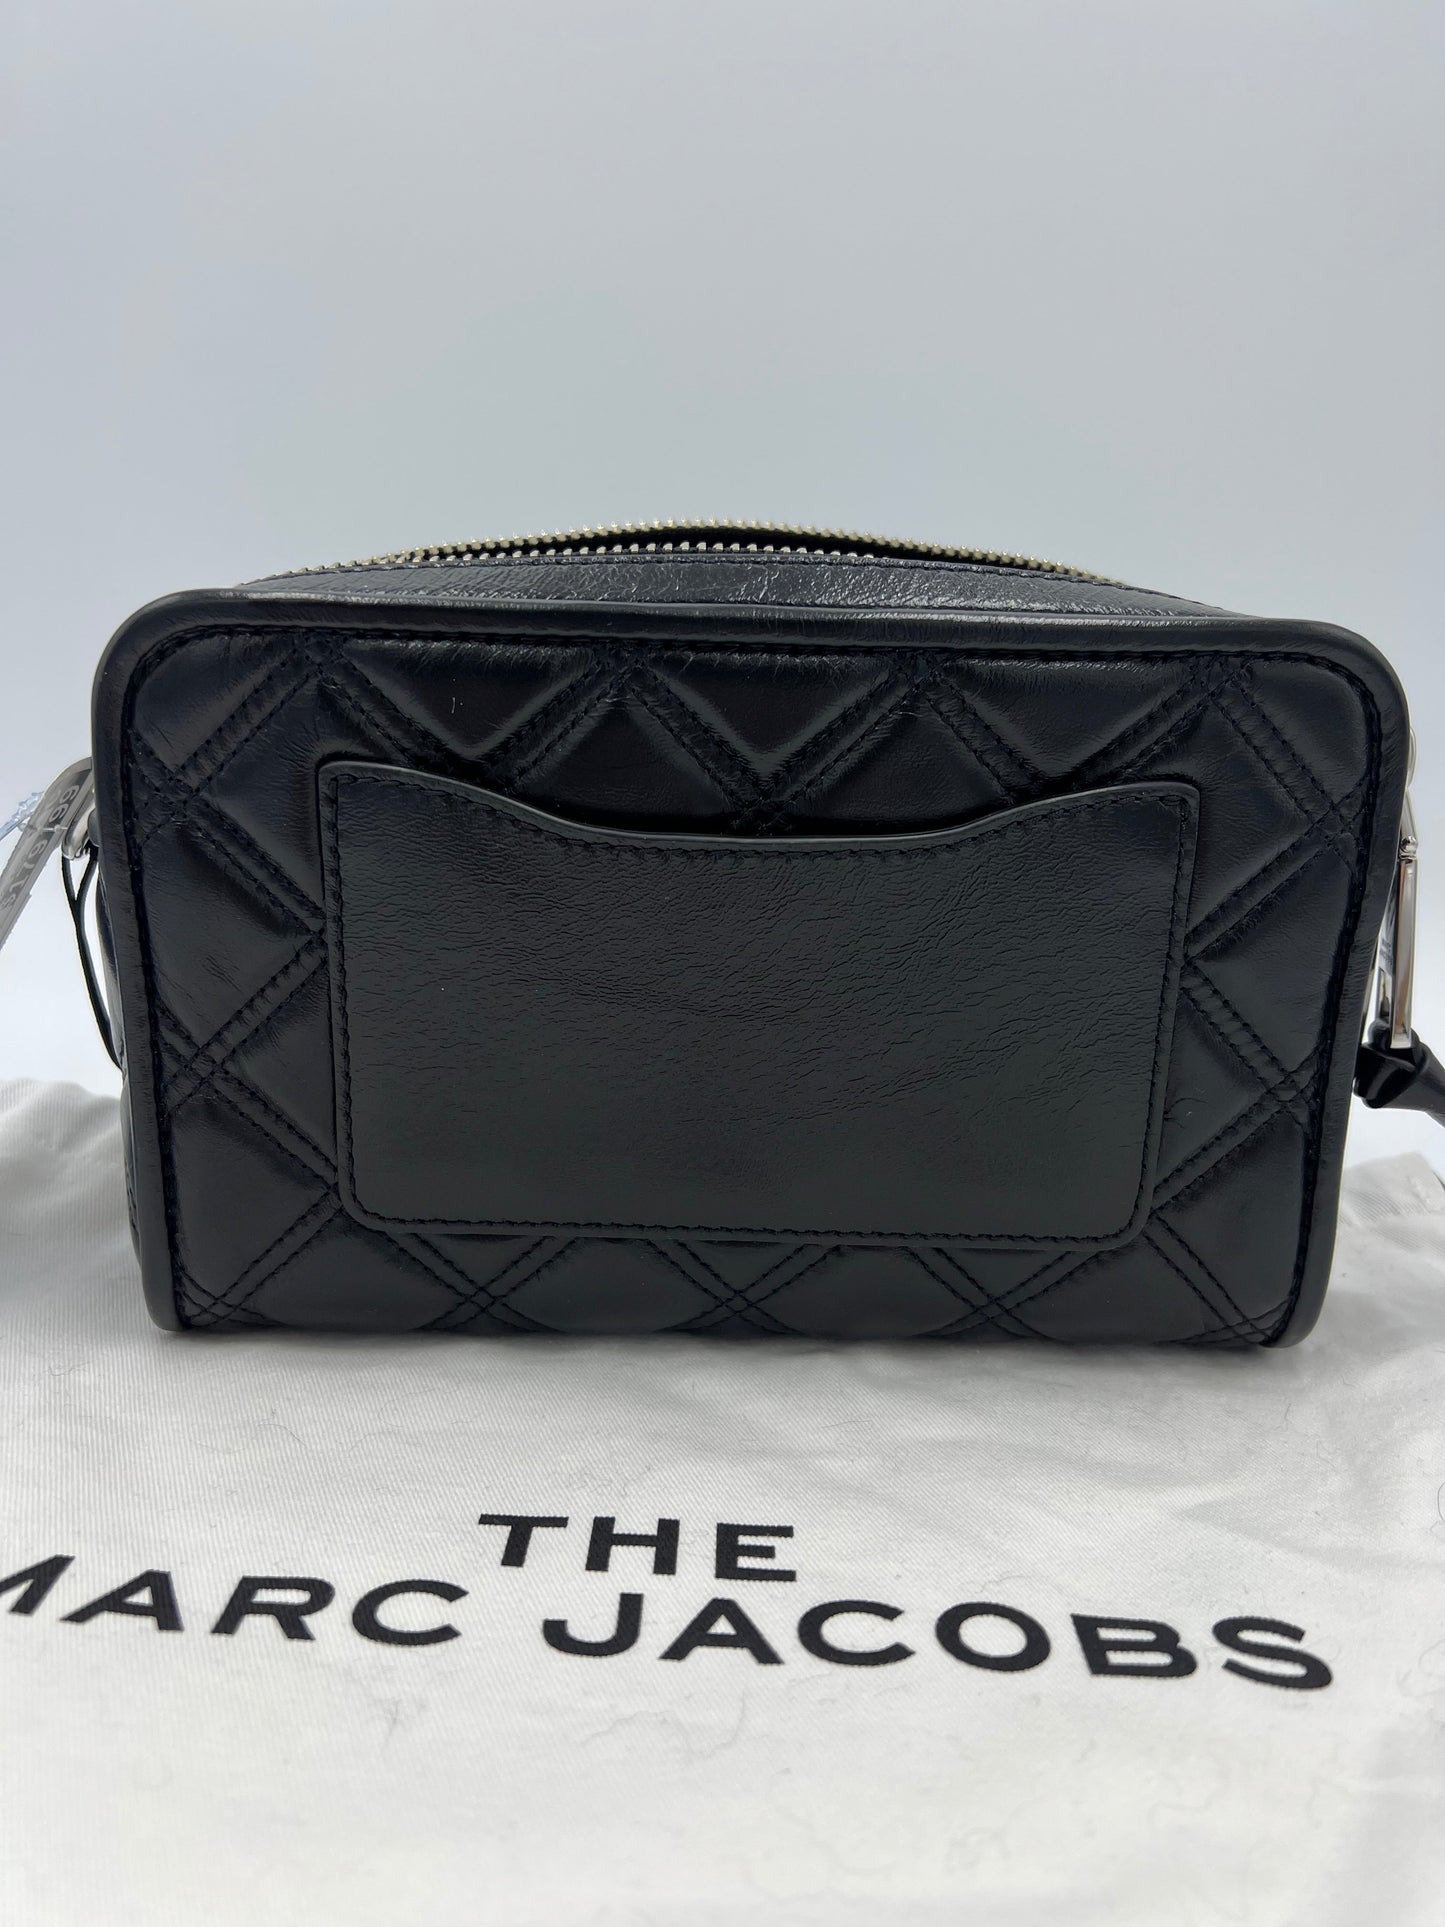 New! Marc Jacobs The Softshot 21